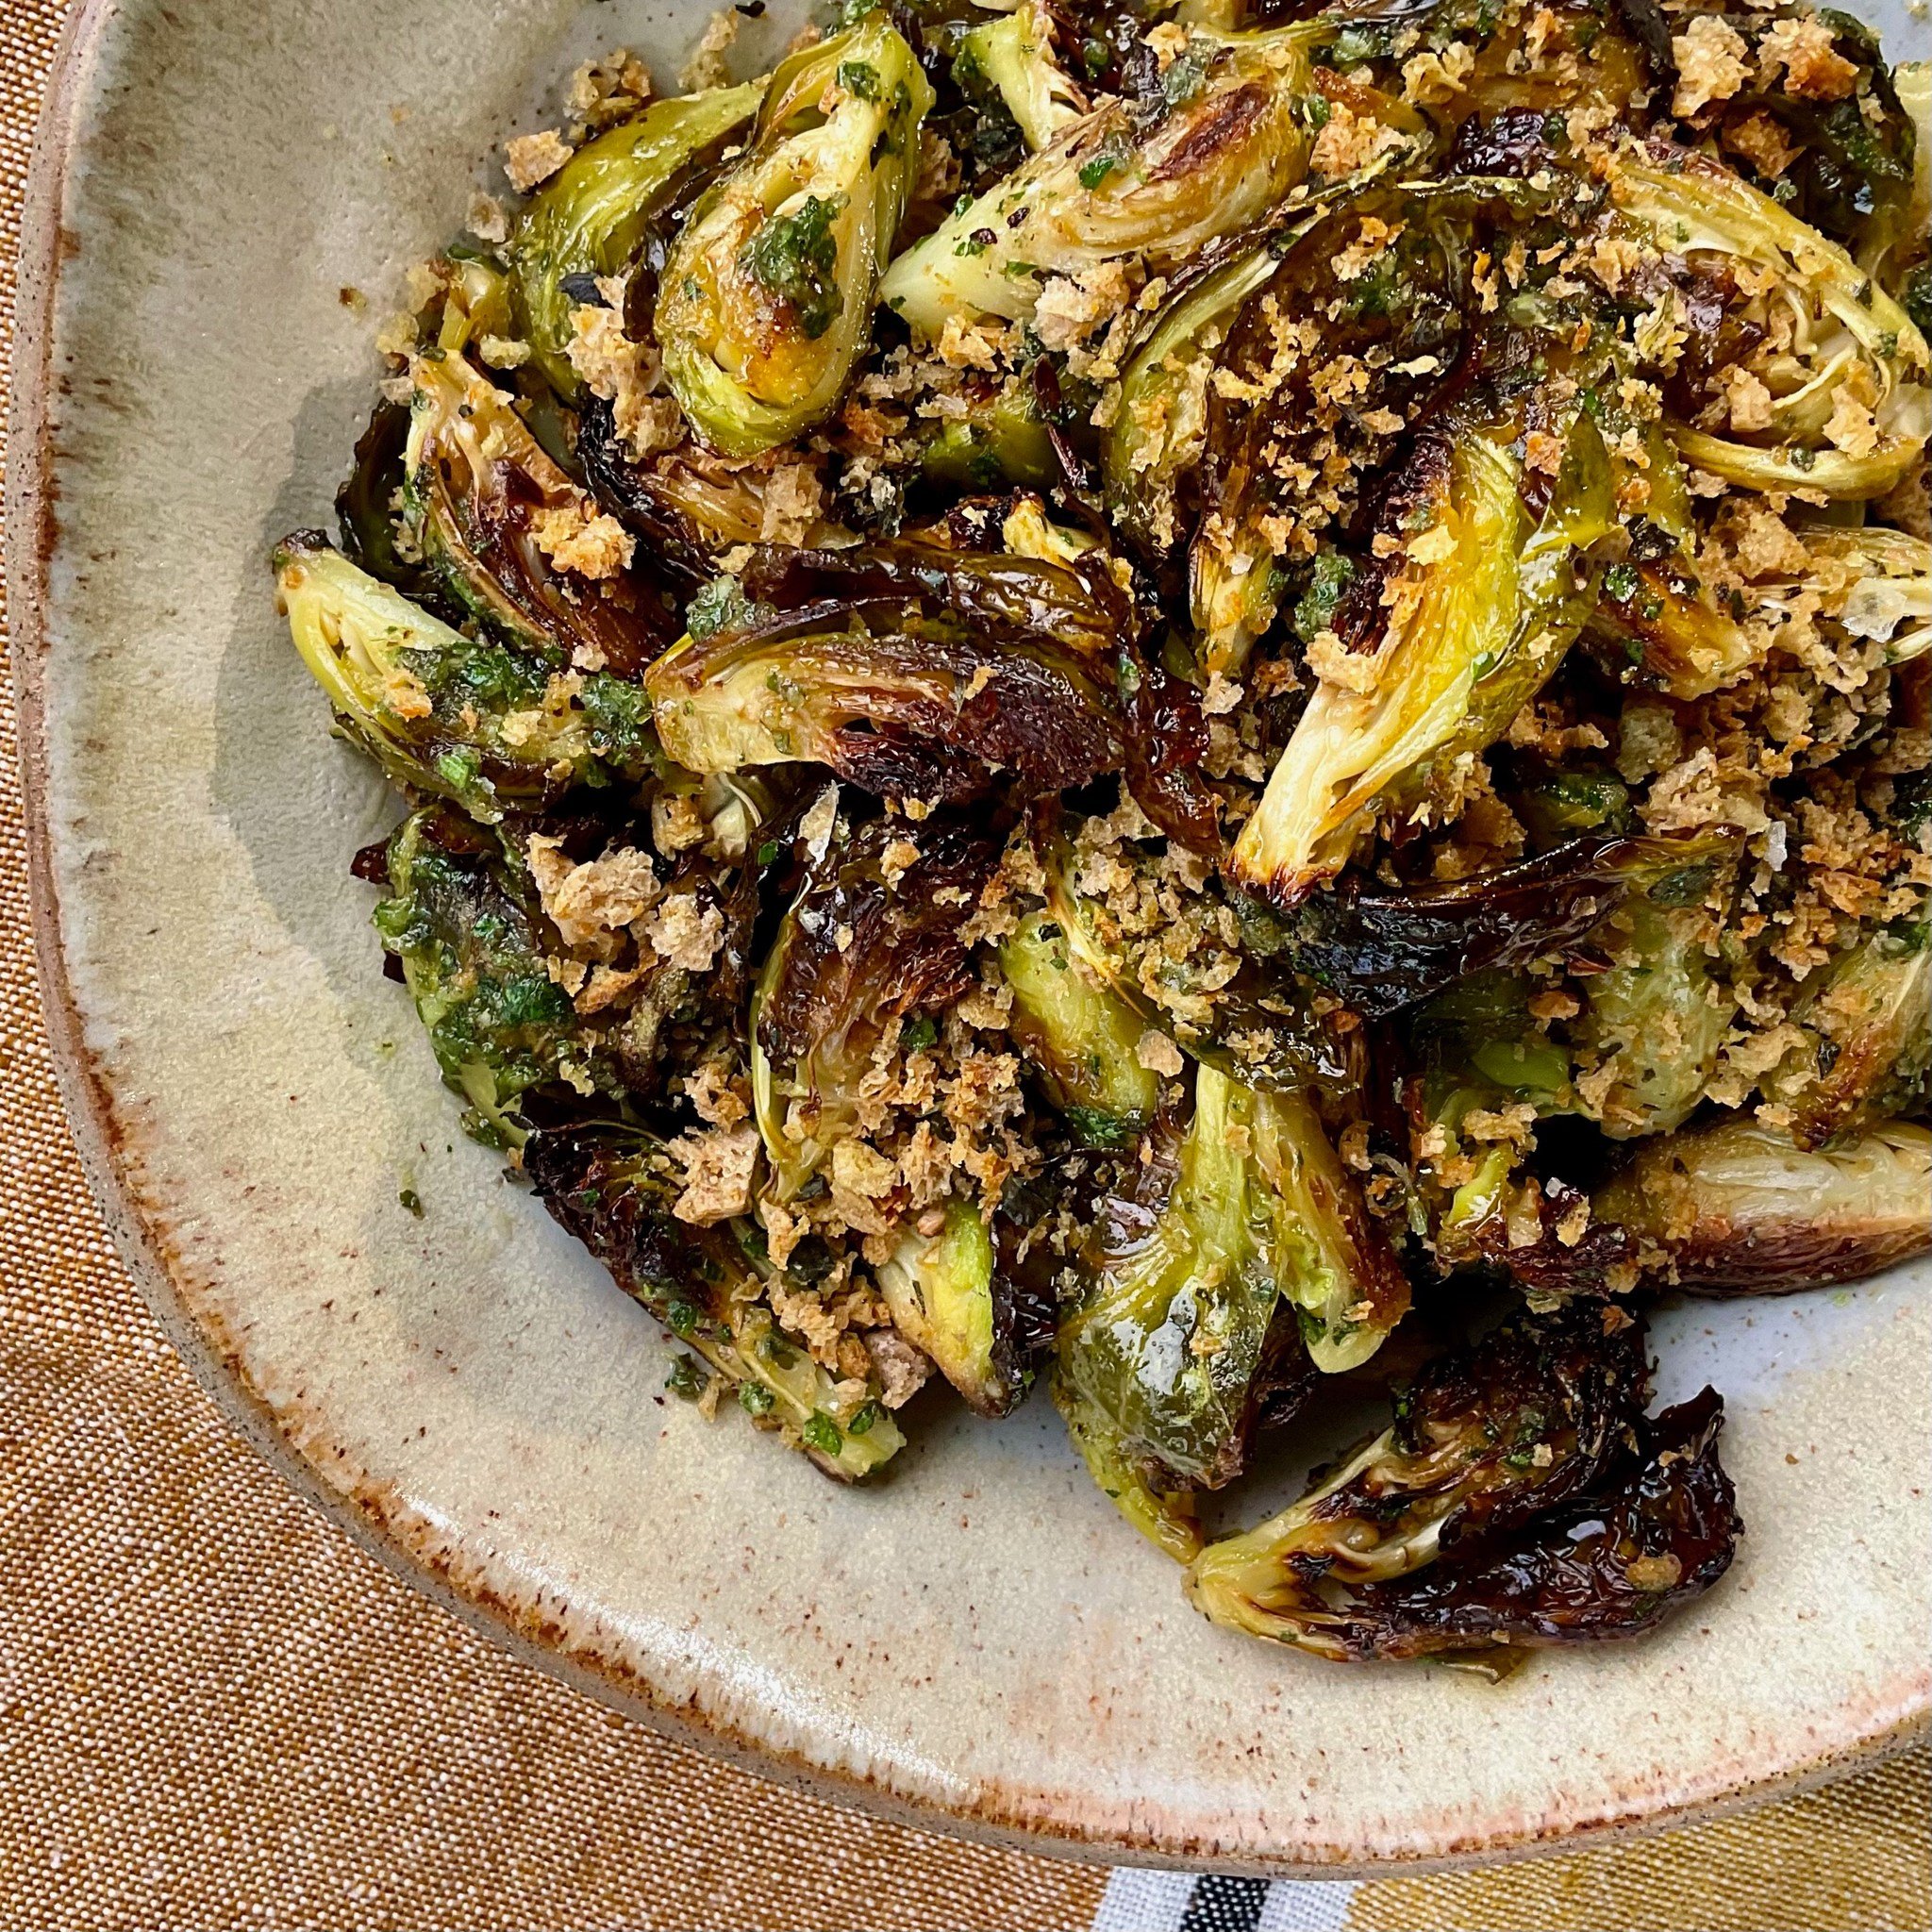 A brussels sprouts number that's big on flavour, but easy in effort? That would be @fionahammondfood's Crispy Roasted Brussels Sprouts Tossed in Pesto &amp; Breadcrumbs ❤️

So moreish, you'll convert sprout sceptics in no time. Recipe link below (or 